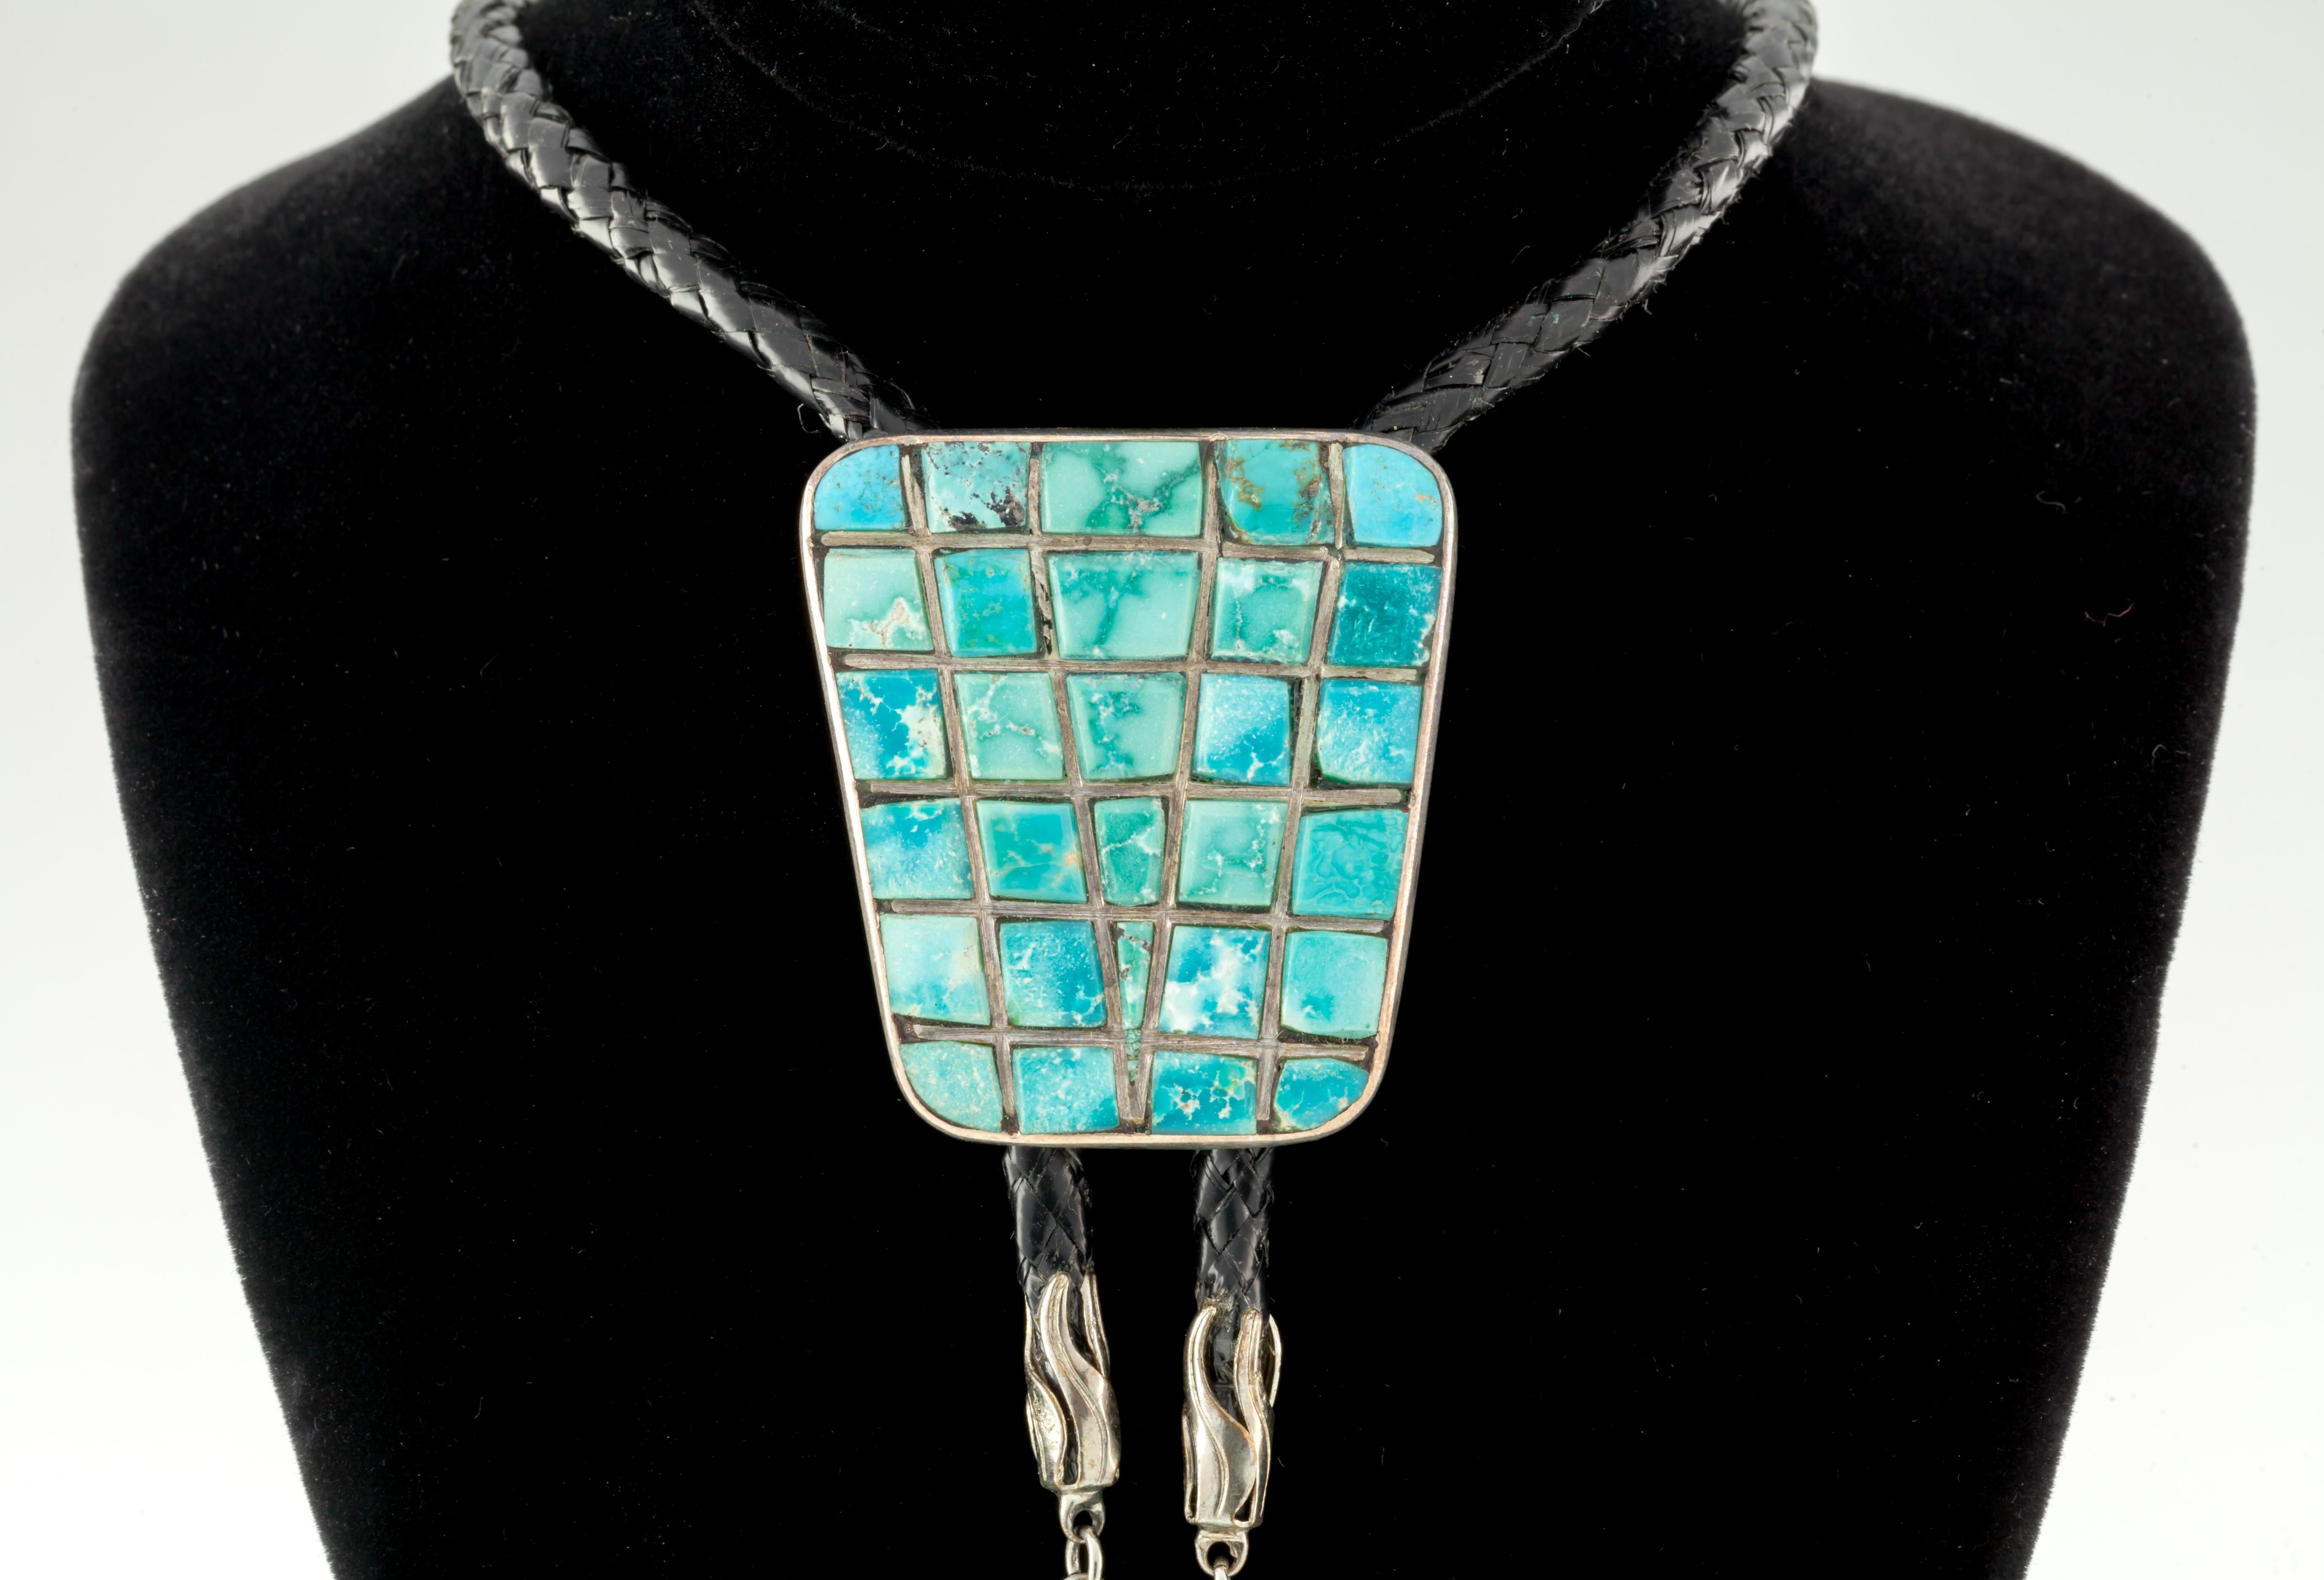 Beautiful Turquoise Inlay Bolo with Black Leather tie accented in Sterling and more Turquoise  
Natural Inlay stones set in tapered figure   
Length & Width of Bolo = 41 mm X 37 mm
Total Mass w/leather = 35.2 grams
Beautiful Hand-Crafted Piece 